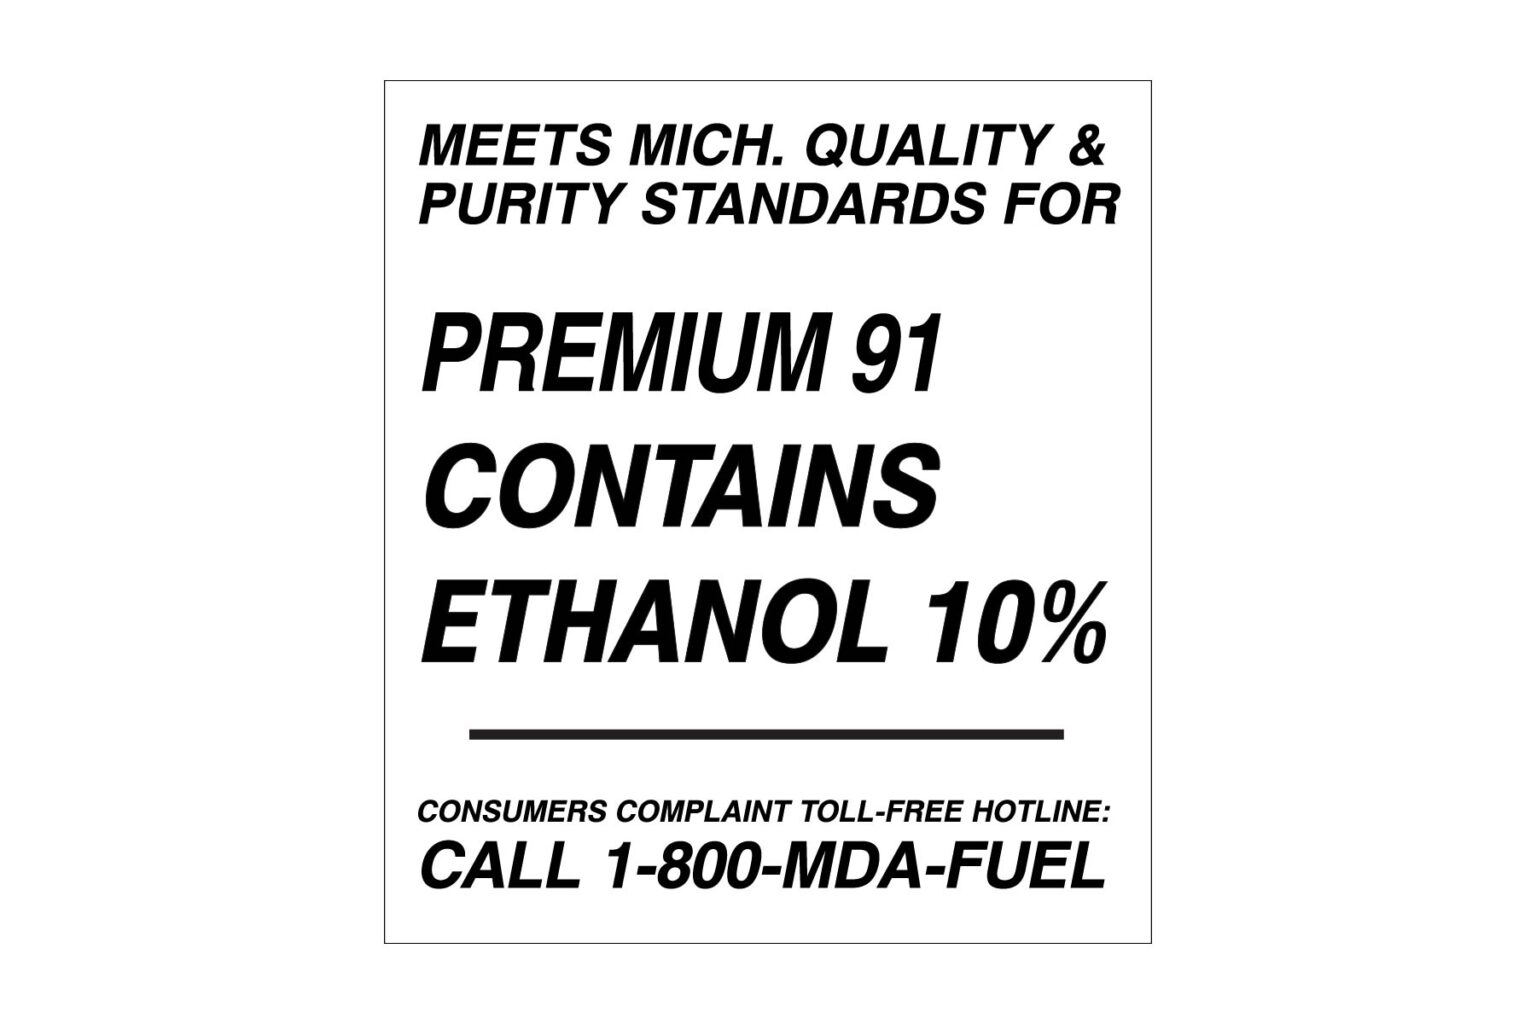 Meets Michigan Quality & Purity Standards for Premium 91 Contains Ethanol 10% Decal